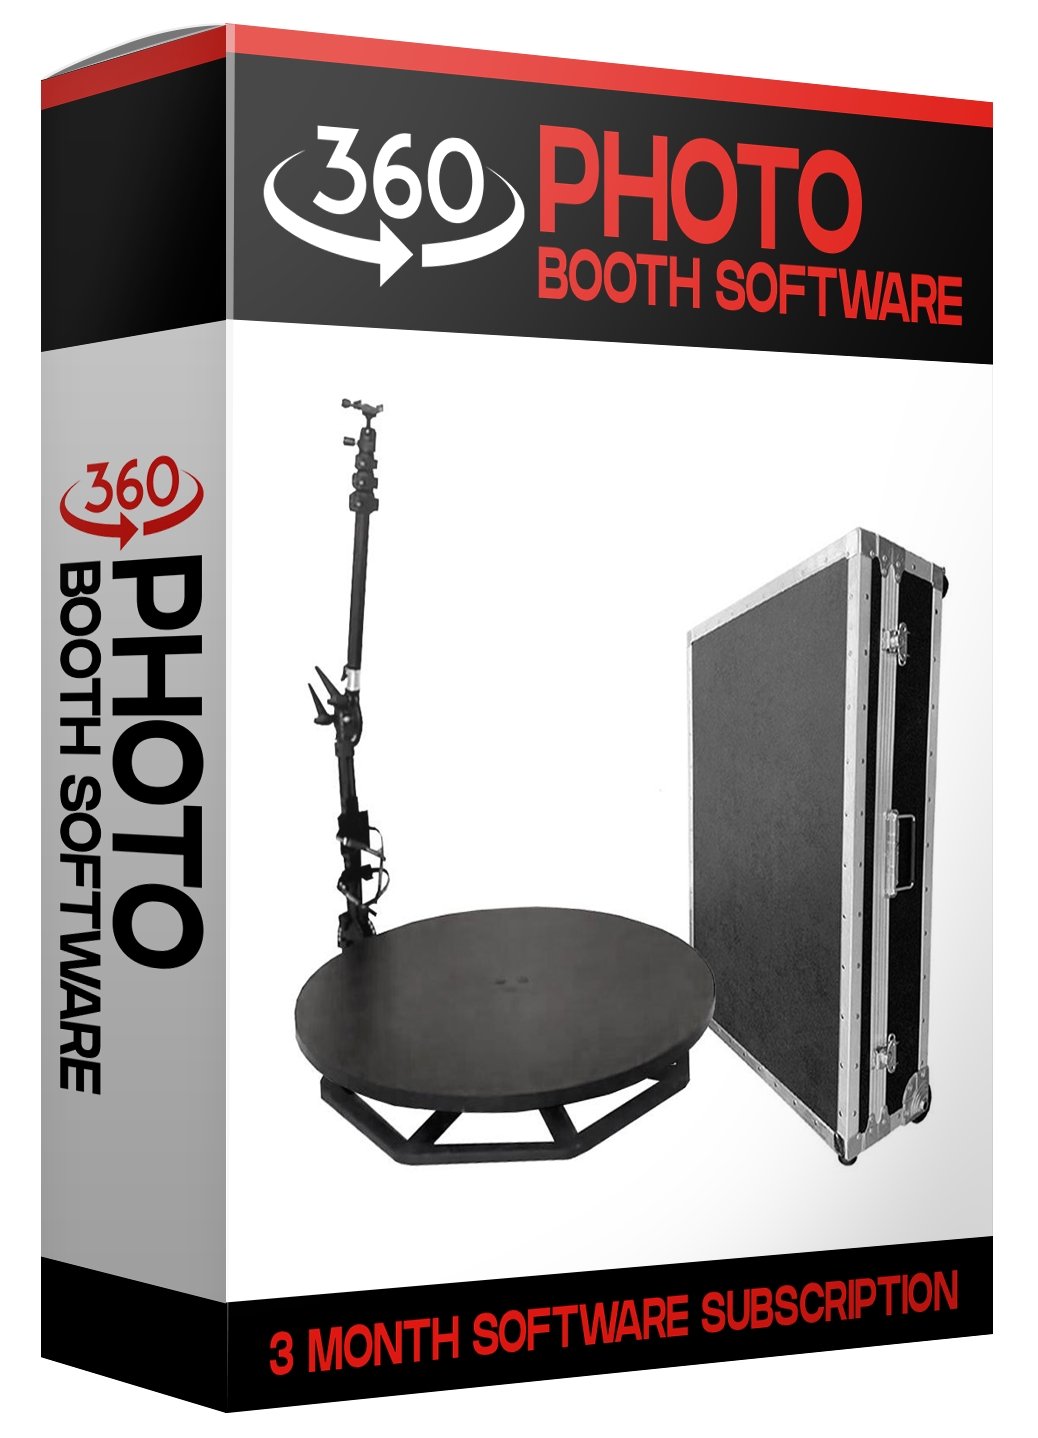 REVOSPIN RA-6 v2 ROUND 360 PHOTO BOOTH PREMIUM PACKAGE (AUTOMATIC SPIN) - VS Booths 360